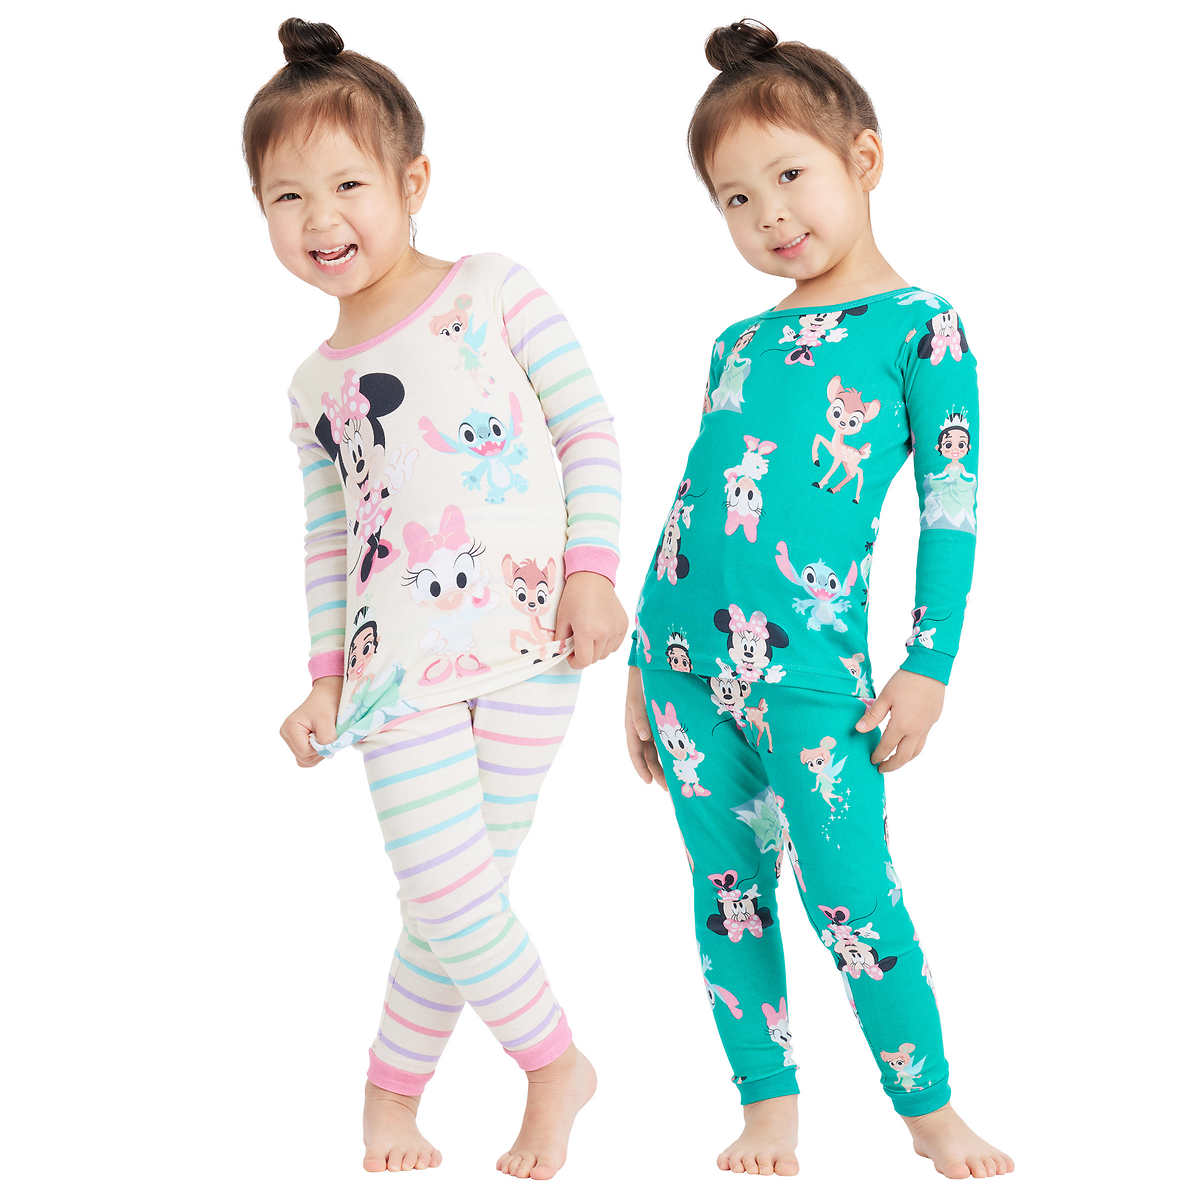 Pact Kids Pajamas Review- The Most Affordable 100% Organic Cotton